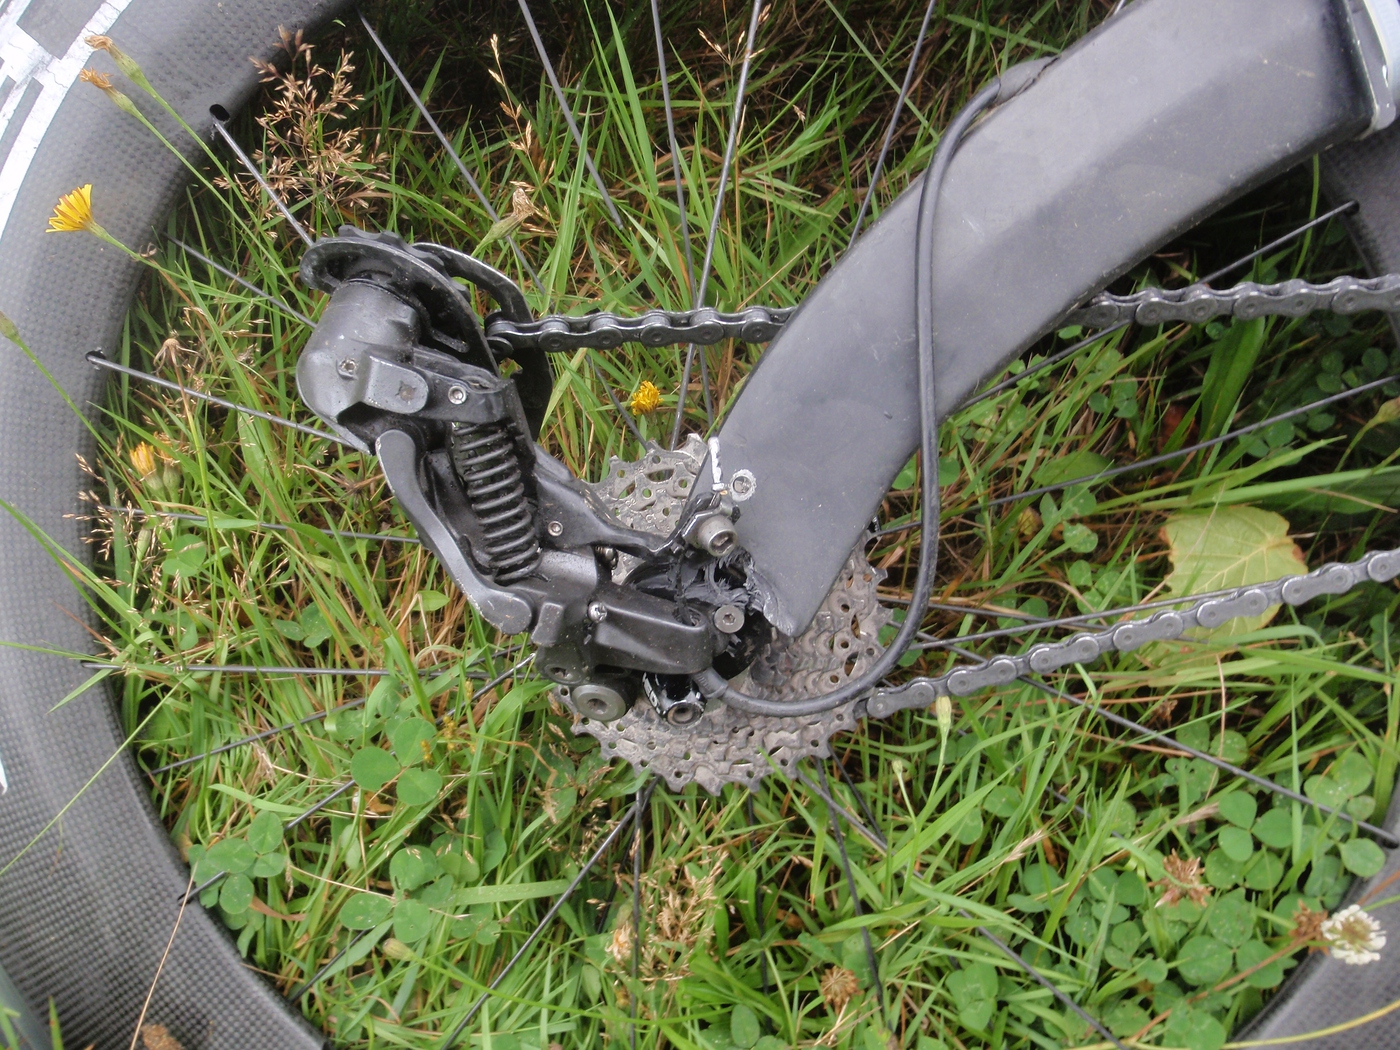 The right chain-stay is broken! :-(